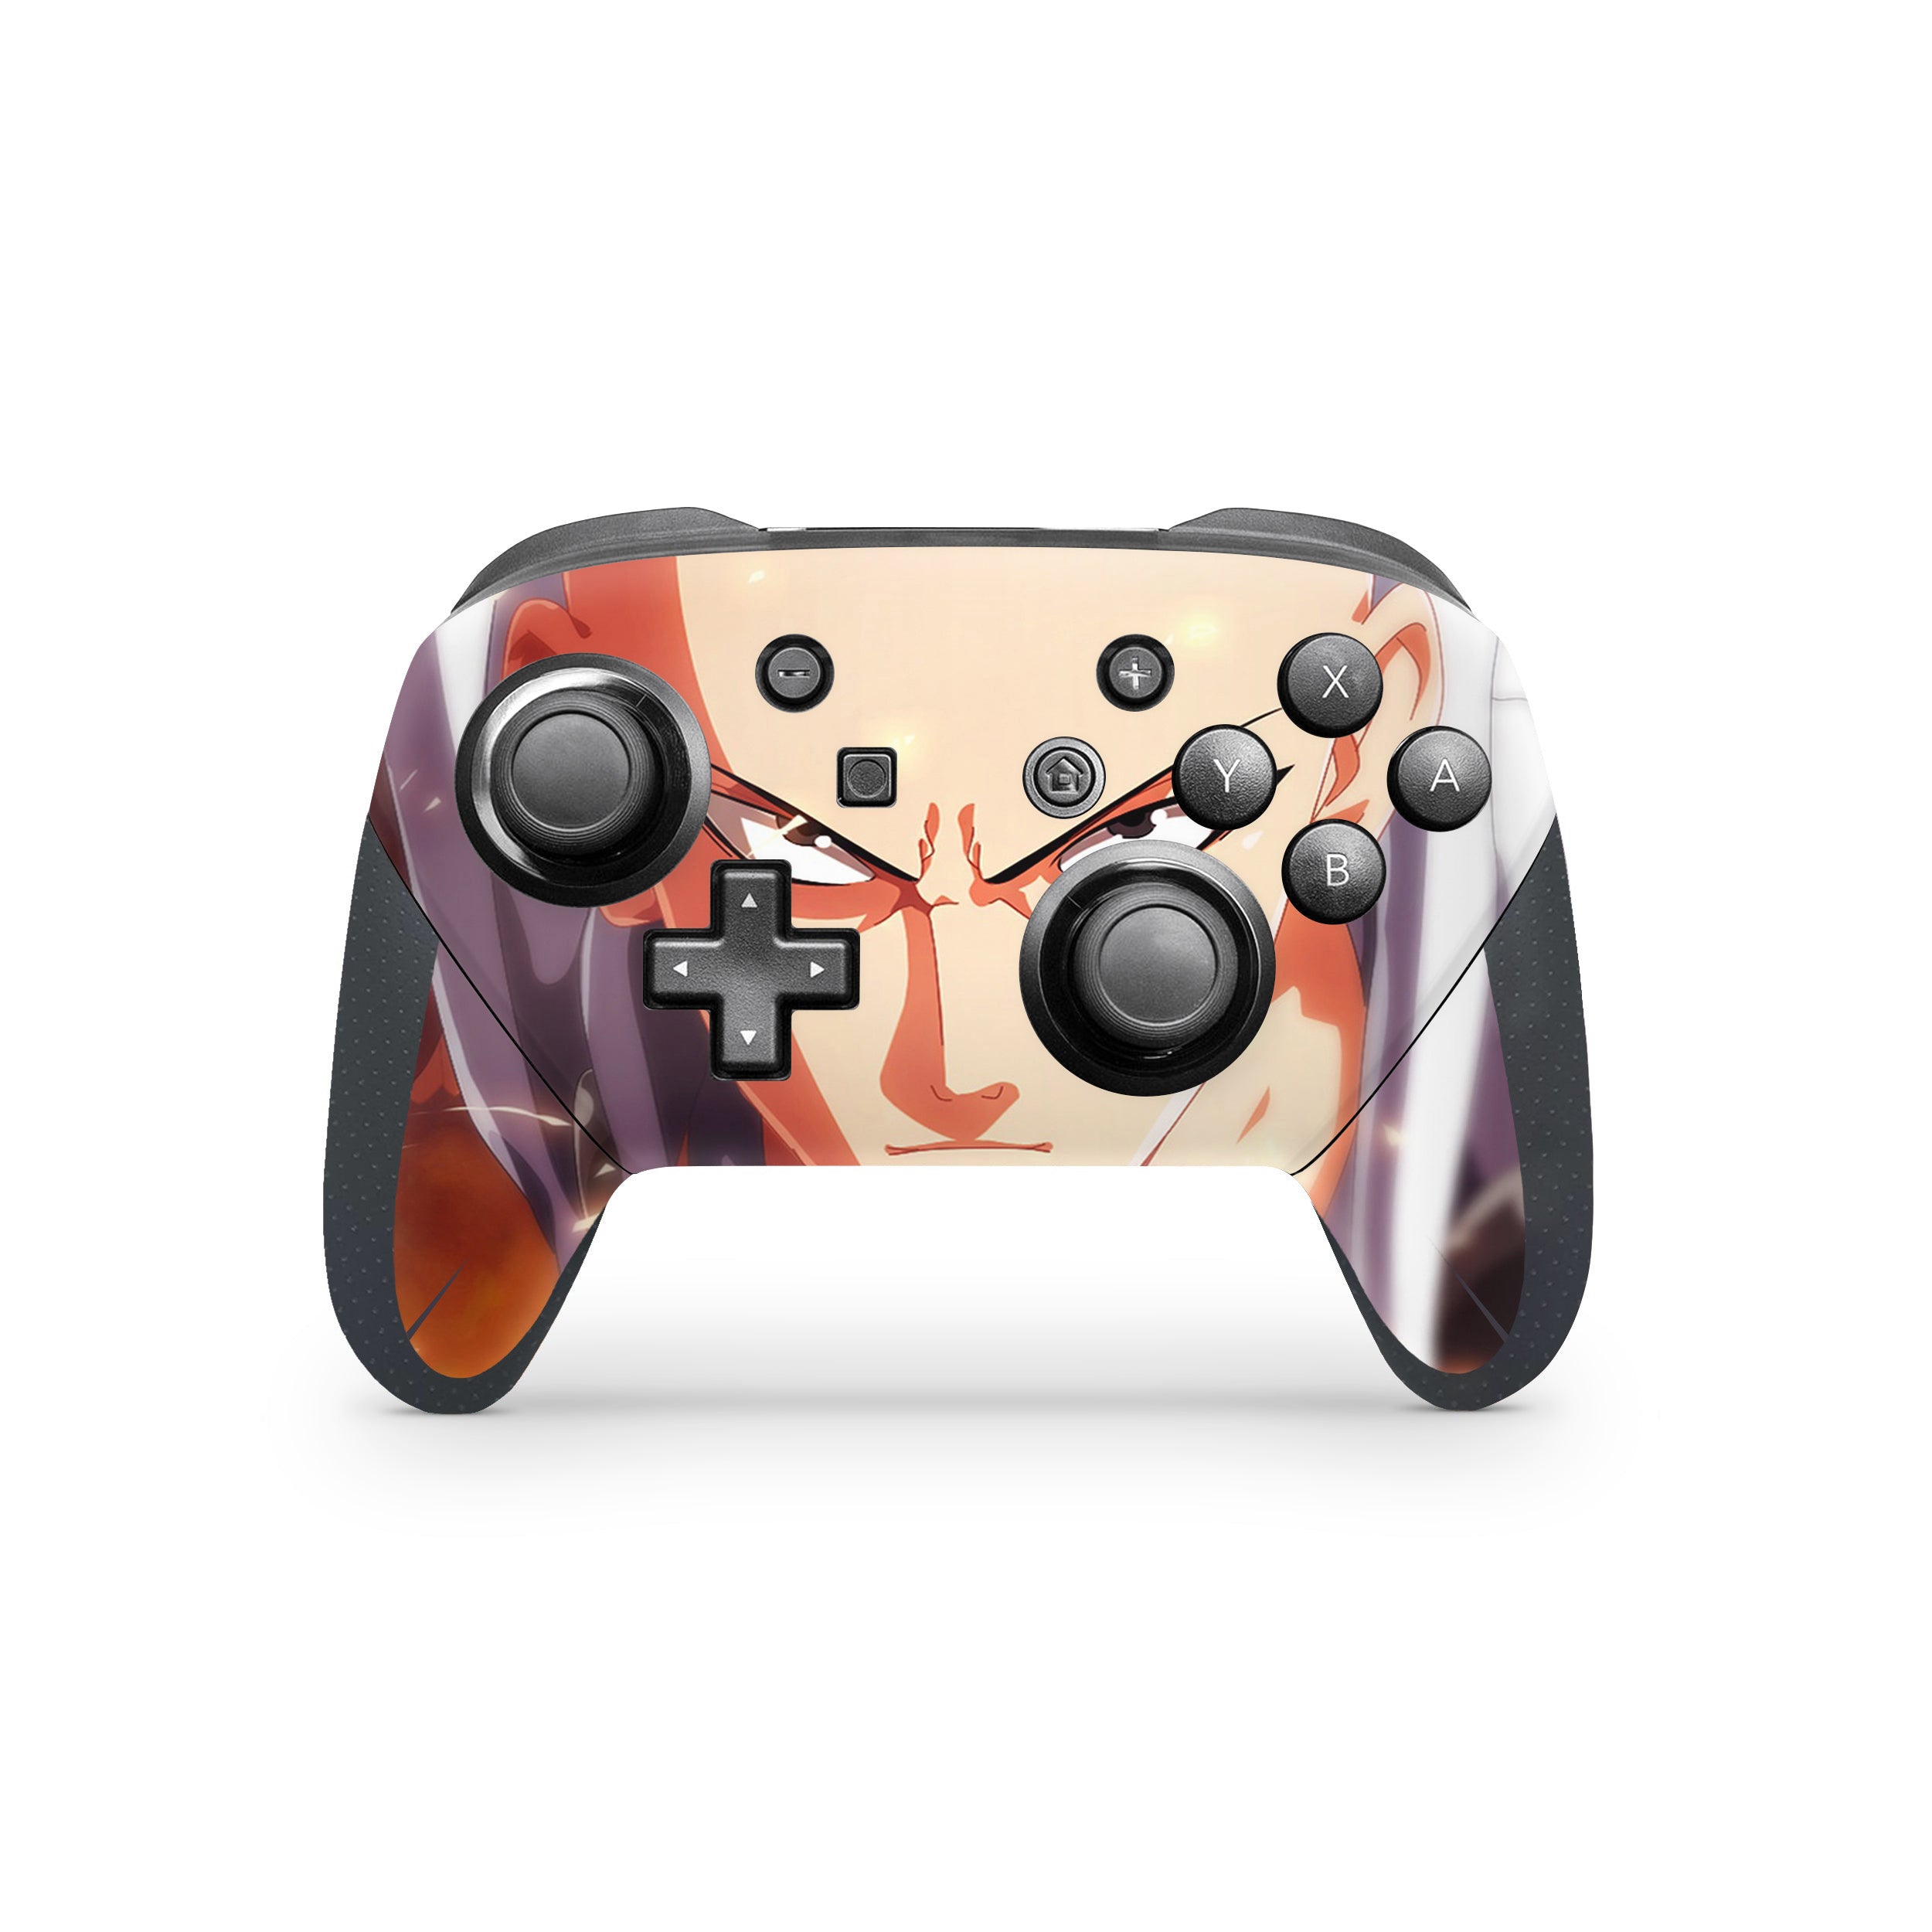 A video game skin featuring a One Punch Man Saitama design for the Switch Pro Controller.